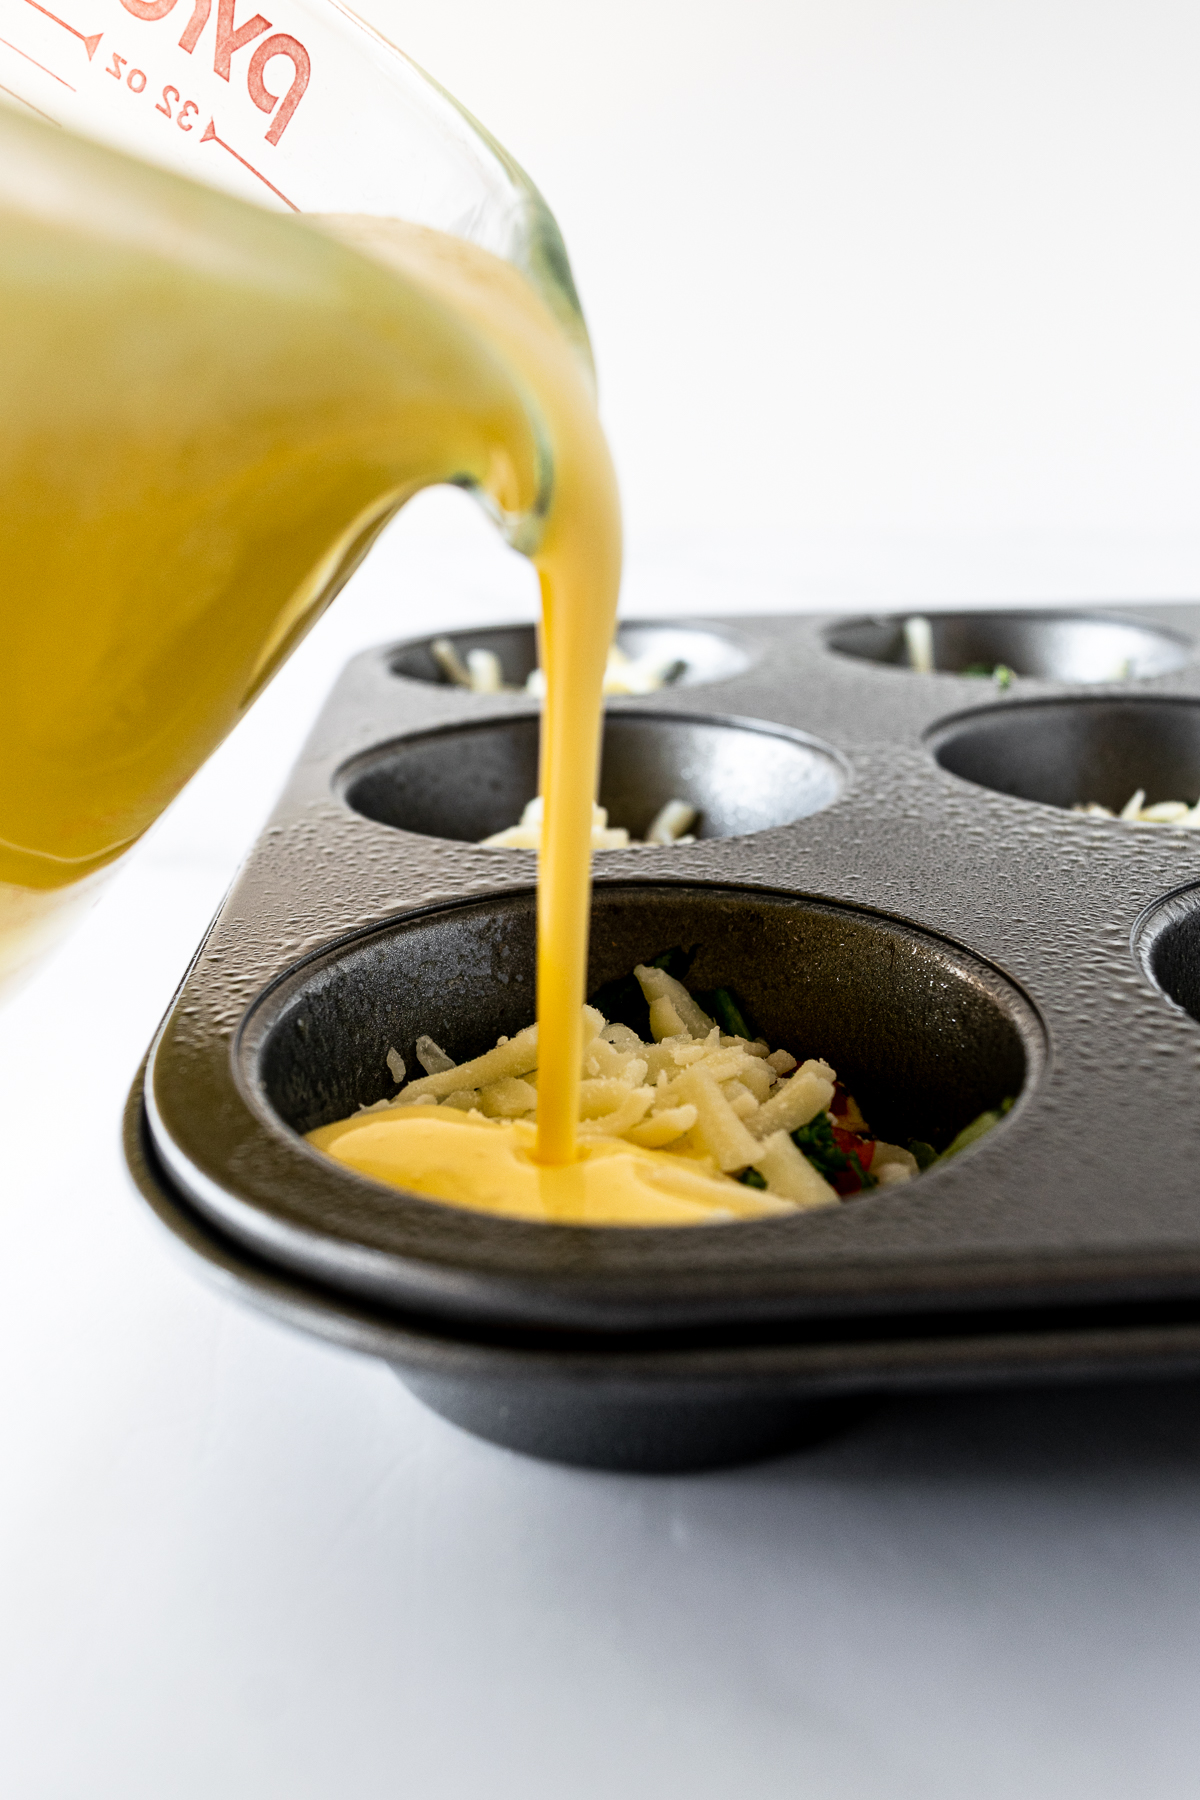 pouring egg muffin mixture into muffin tins.